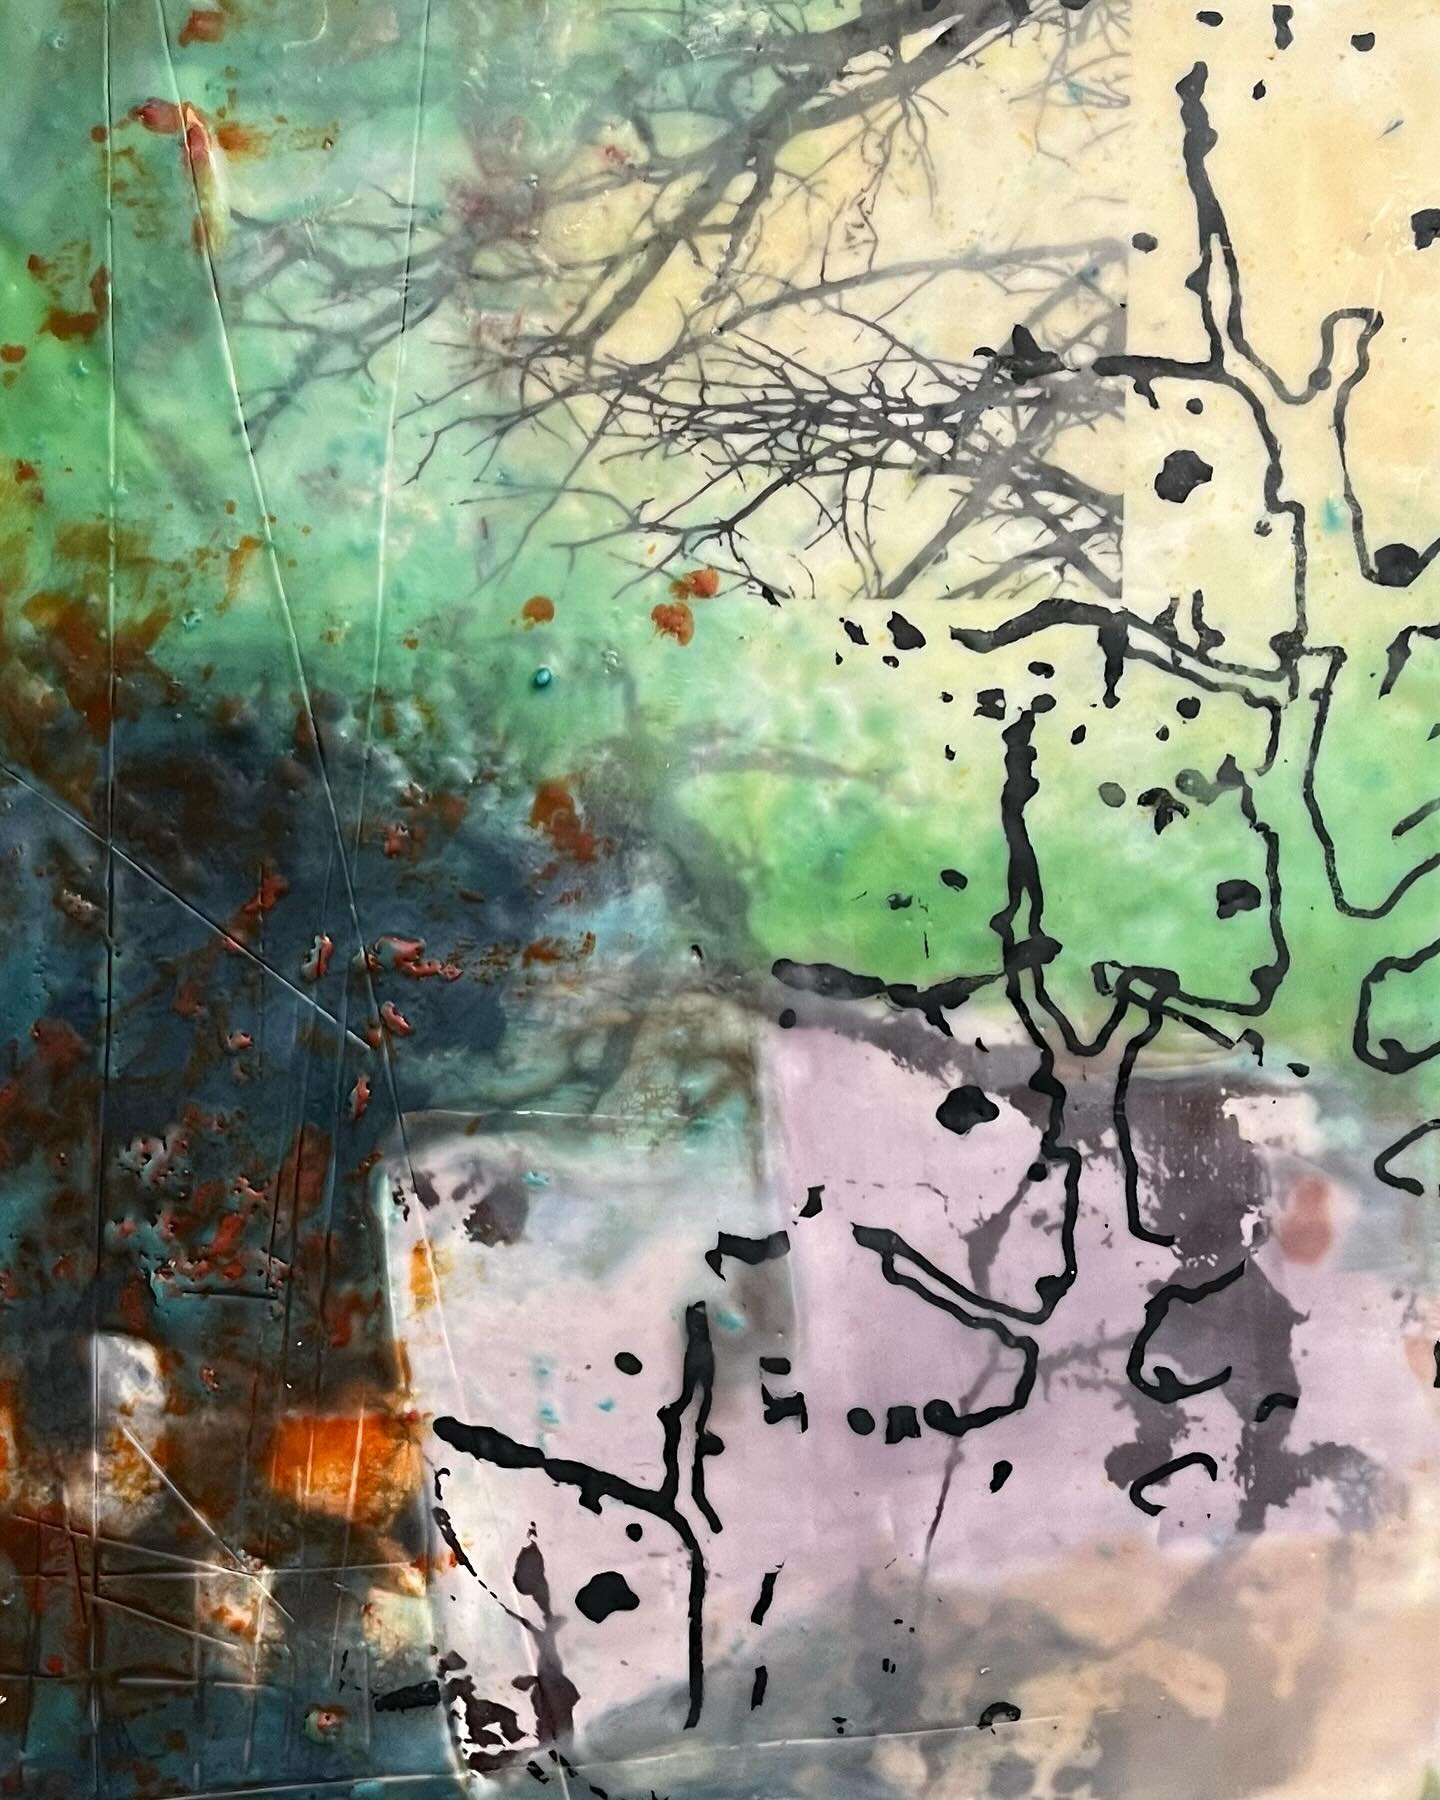 Finished this one yesterday. No title yet but I like the wildness in it, and adding some areas of texture in the wax. On the small side in size;20x16 in, encaustic with silk screen.
#encausticmixedmedia #encausticwax #contemporarylandscapes #abstract